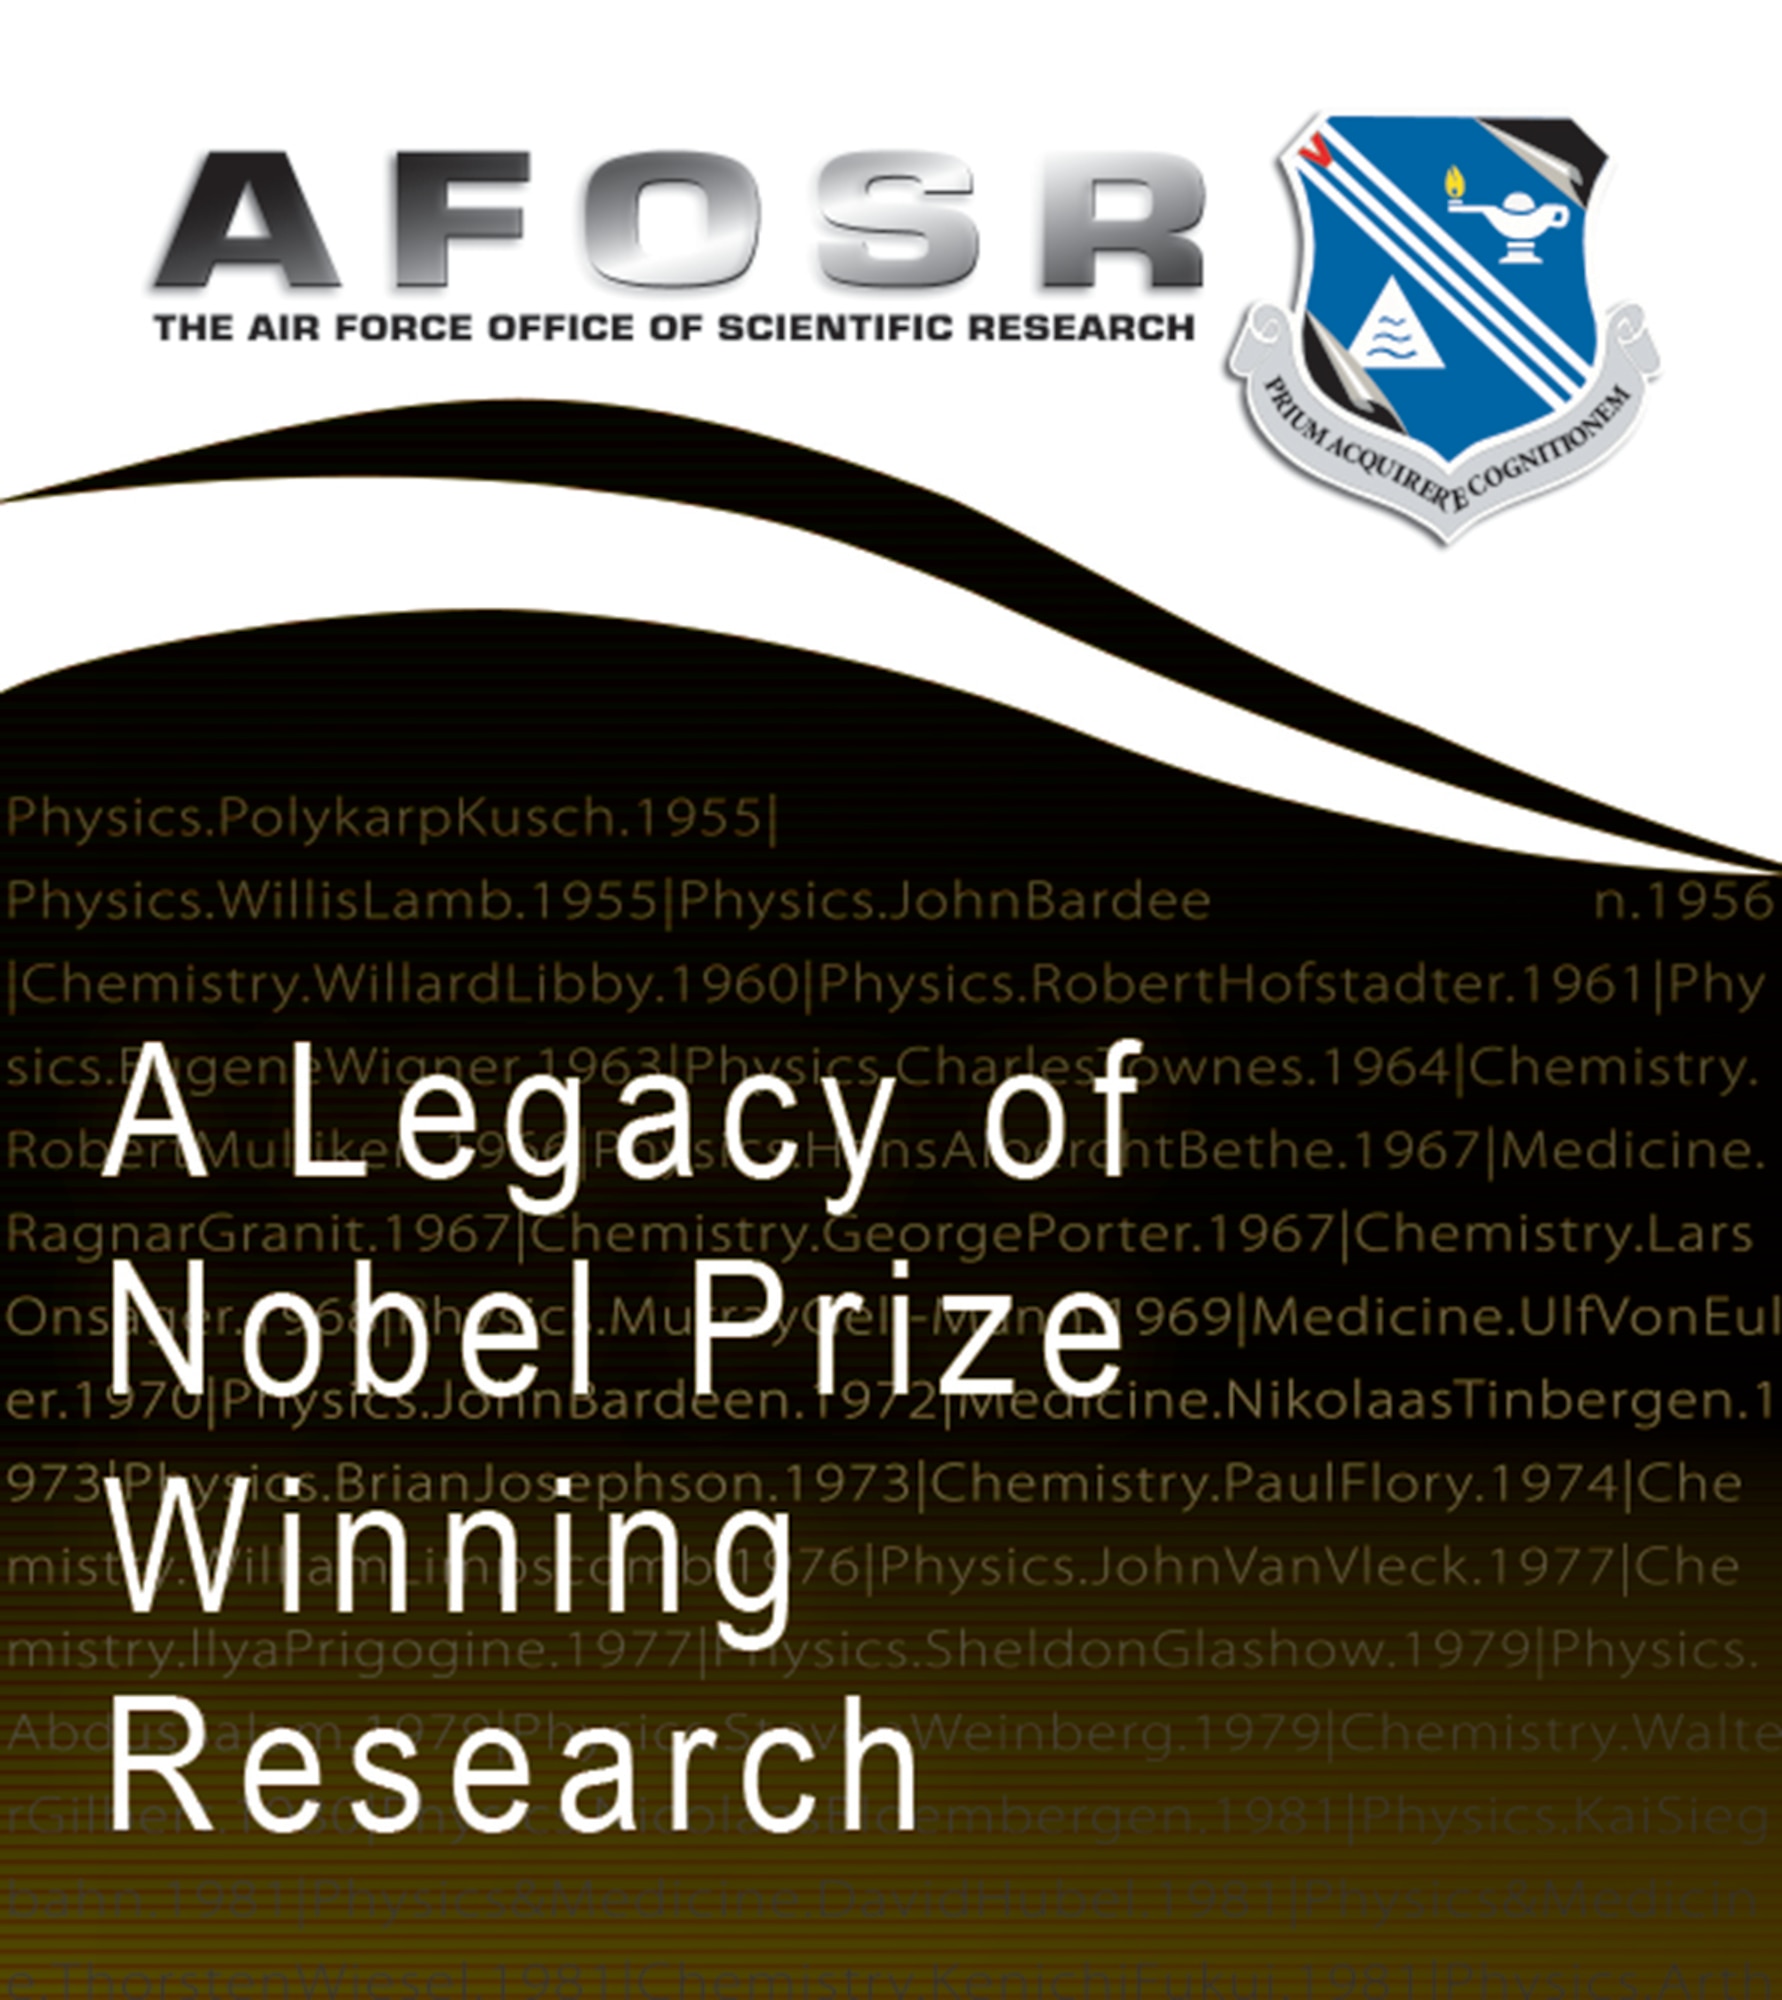 The Air Force Office of Scientific Research has contributed basic research funding to 78 Nobel laureates over its 60-year history. Four of those laureates were added following the Nobel Foundation’s 2014 announcements for Physics and Chemistry on Oct. 7 and 8.